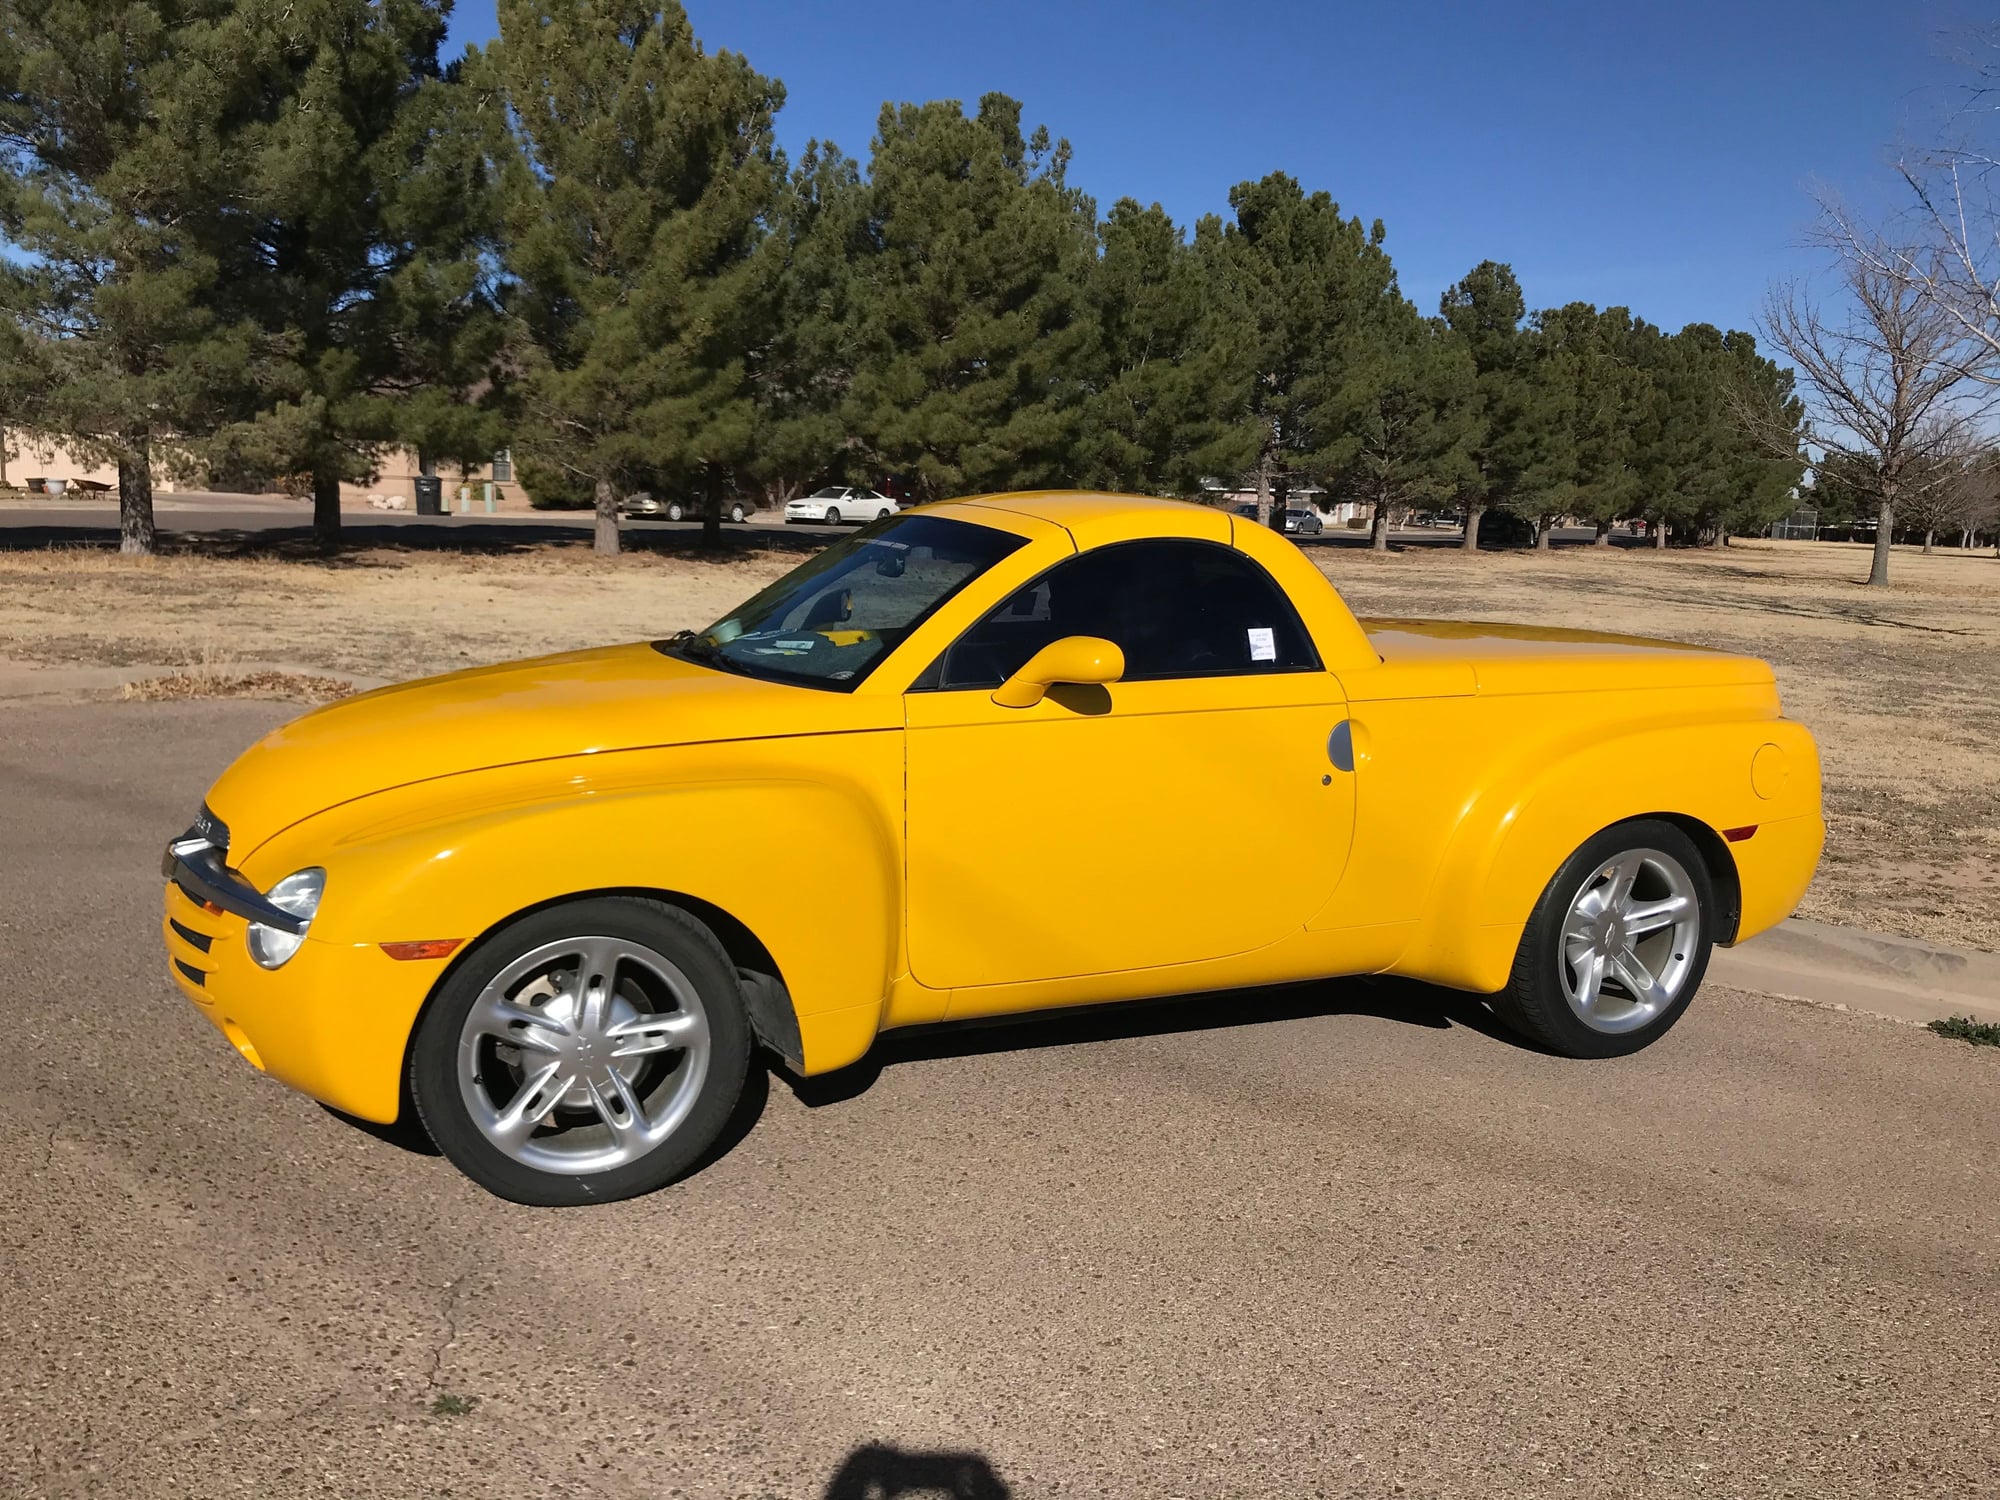 2003 Chevrolet SSR - 2003 Chevy SSR 66,000 miles  $18,900 - Used - VIN 1GCES14P13B100789 - 66,500 Miles - 8 cyl - 2WD - Automatic - Convertible - Yellow - Roswell, NM 88201, United States